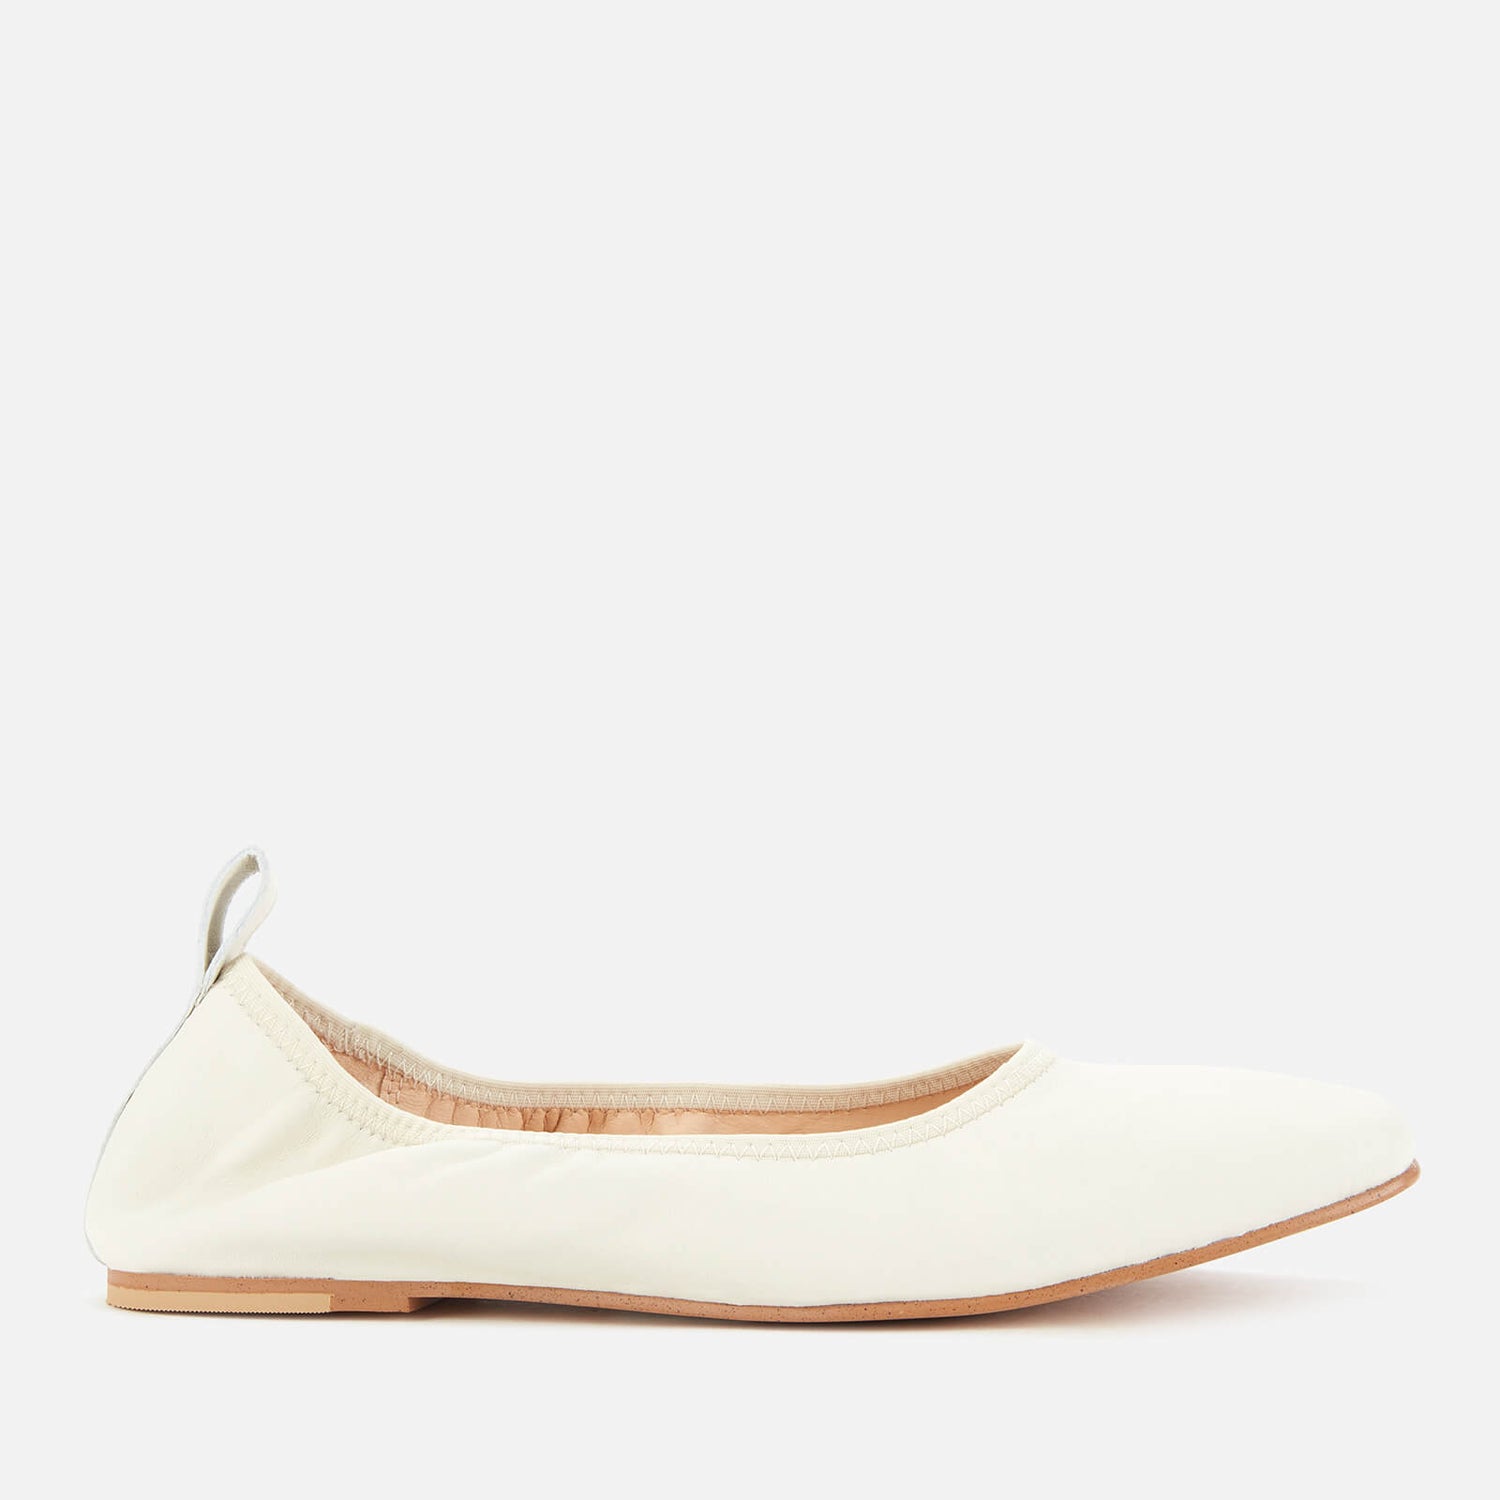 Clarks Women's Pure Leather Ballet Flats - White